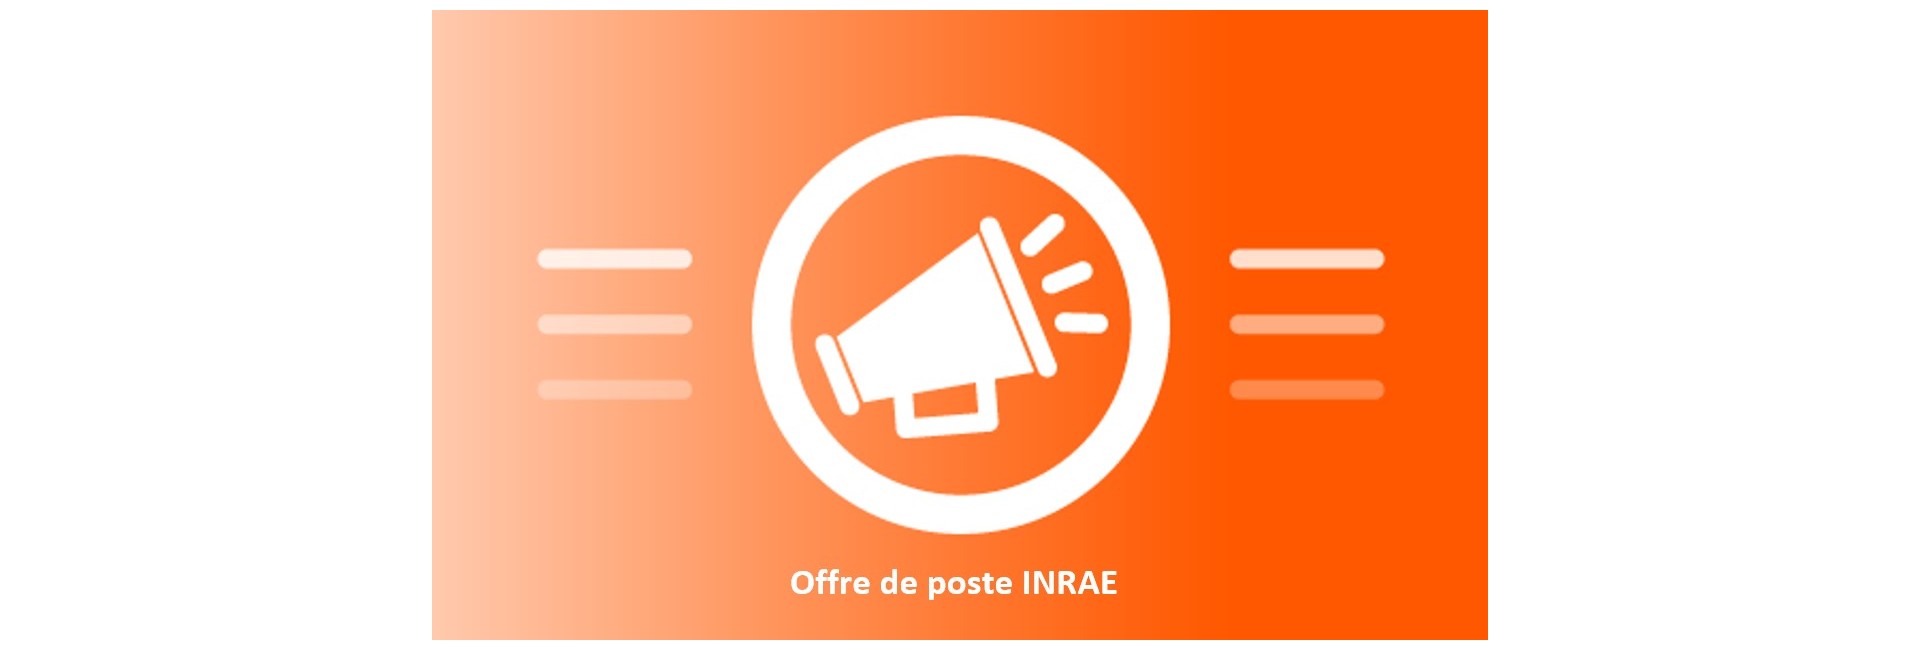  Picto-offre-poste-inrae2_0.jpg (